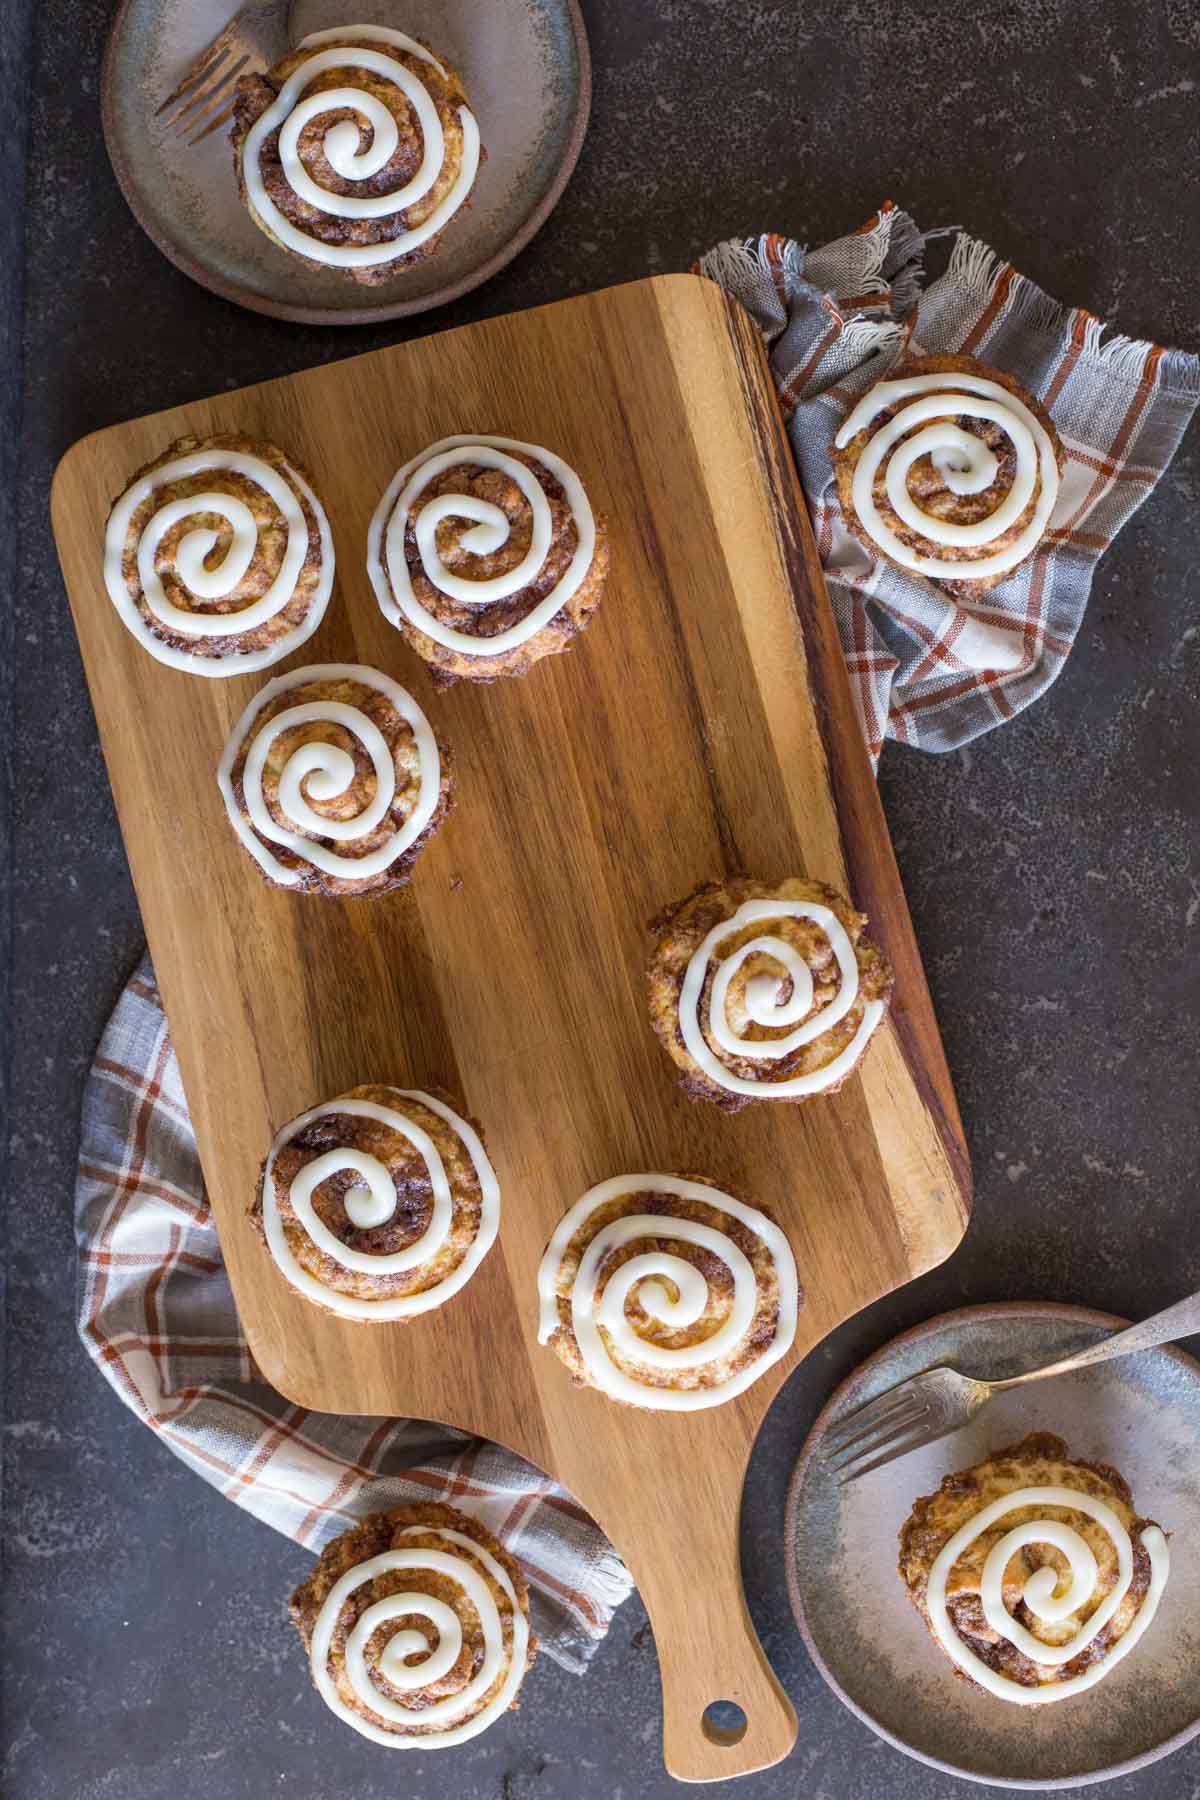 Cinnamon Roll Muffins with a cream cheese icing swirl on a wooden cutting board.